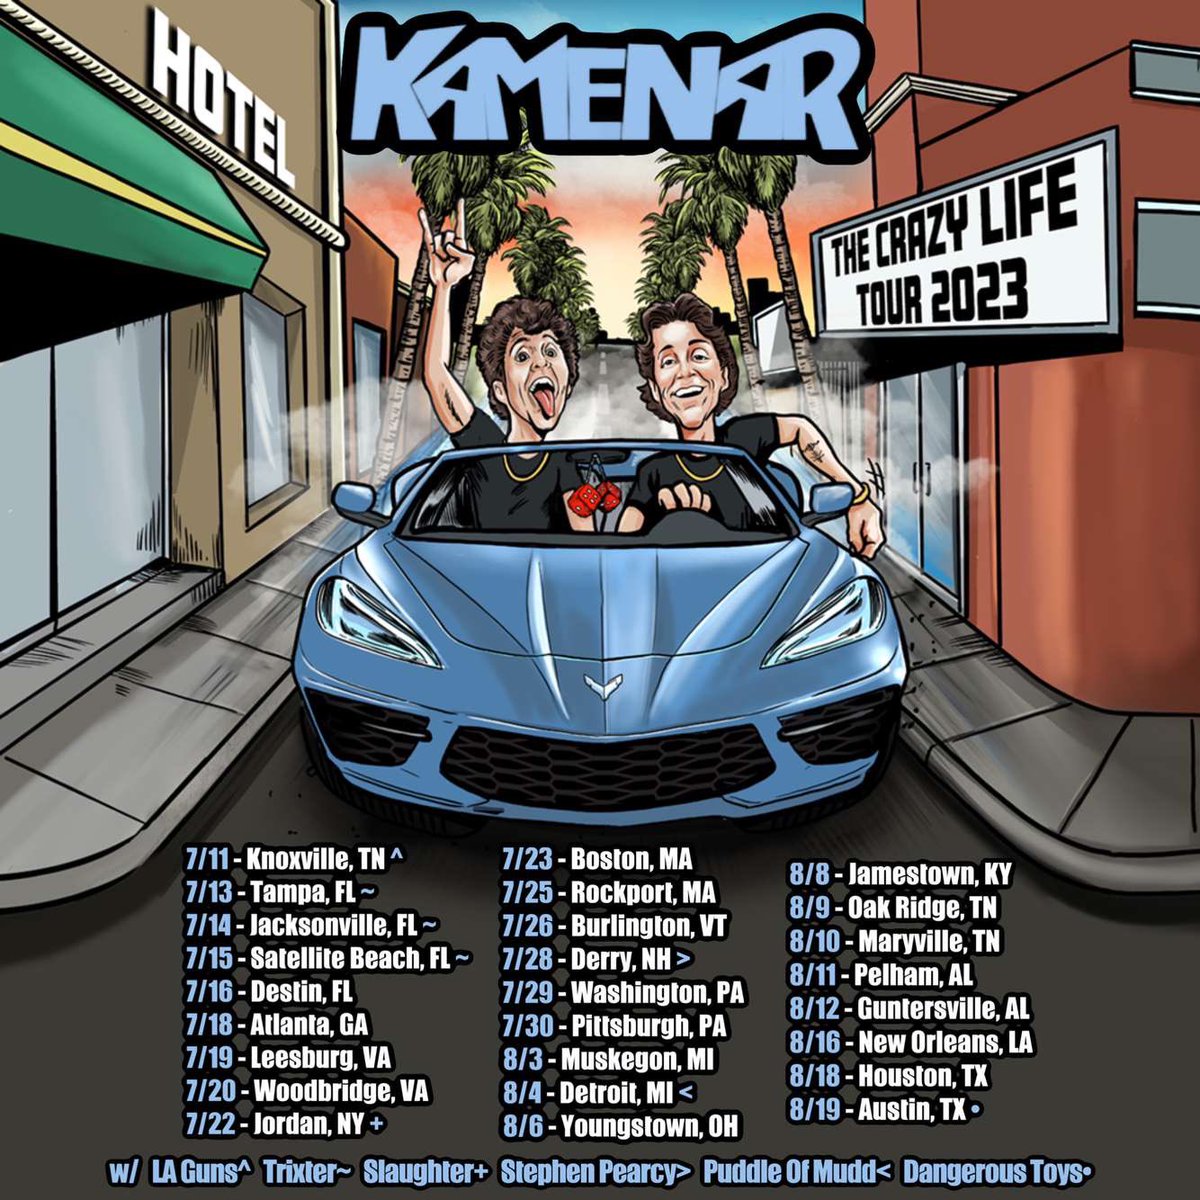 KAMENAR: THE CRAZY LIFE TOUR -
LIVE AT KEGS CANALSIDE IN JORDAN, NY WITH SLAUGHTER, JULY 22ND 2023

#Kamenar